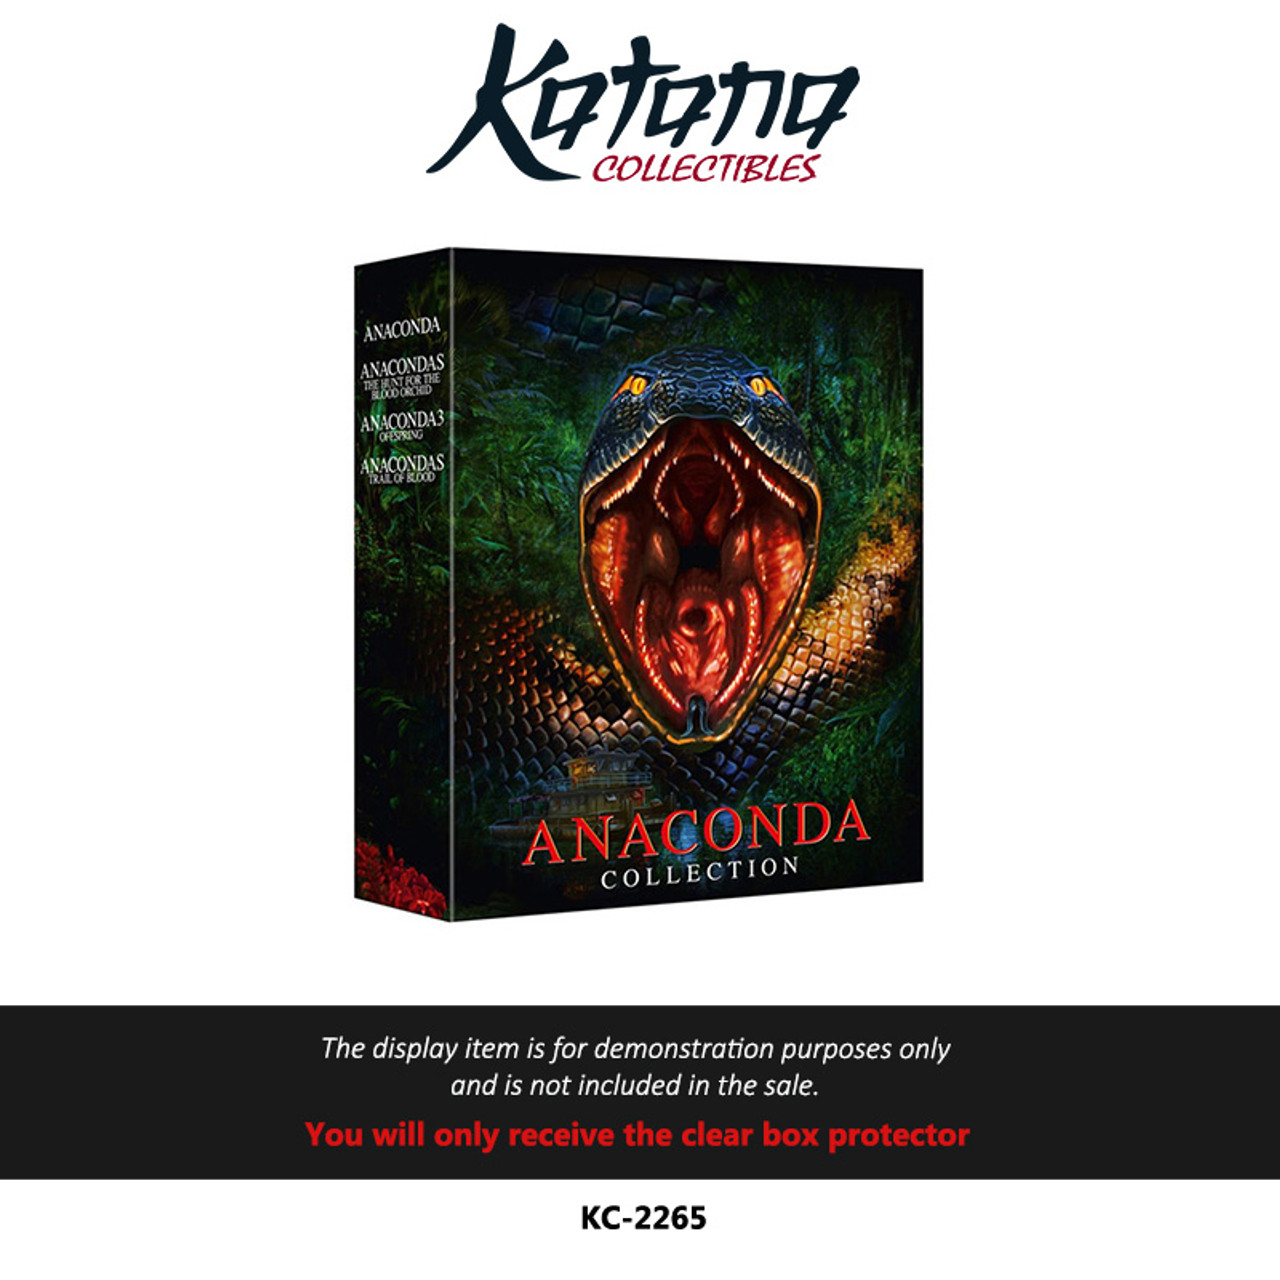 Katana Collectibles Protector For Anaconda Collection Limited Edition - from 88 Films